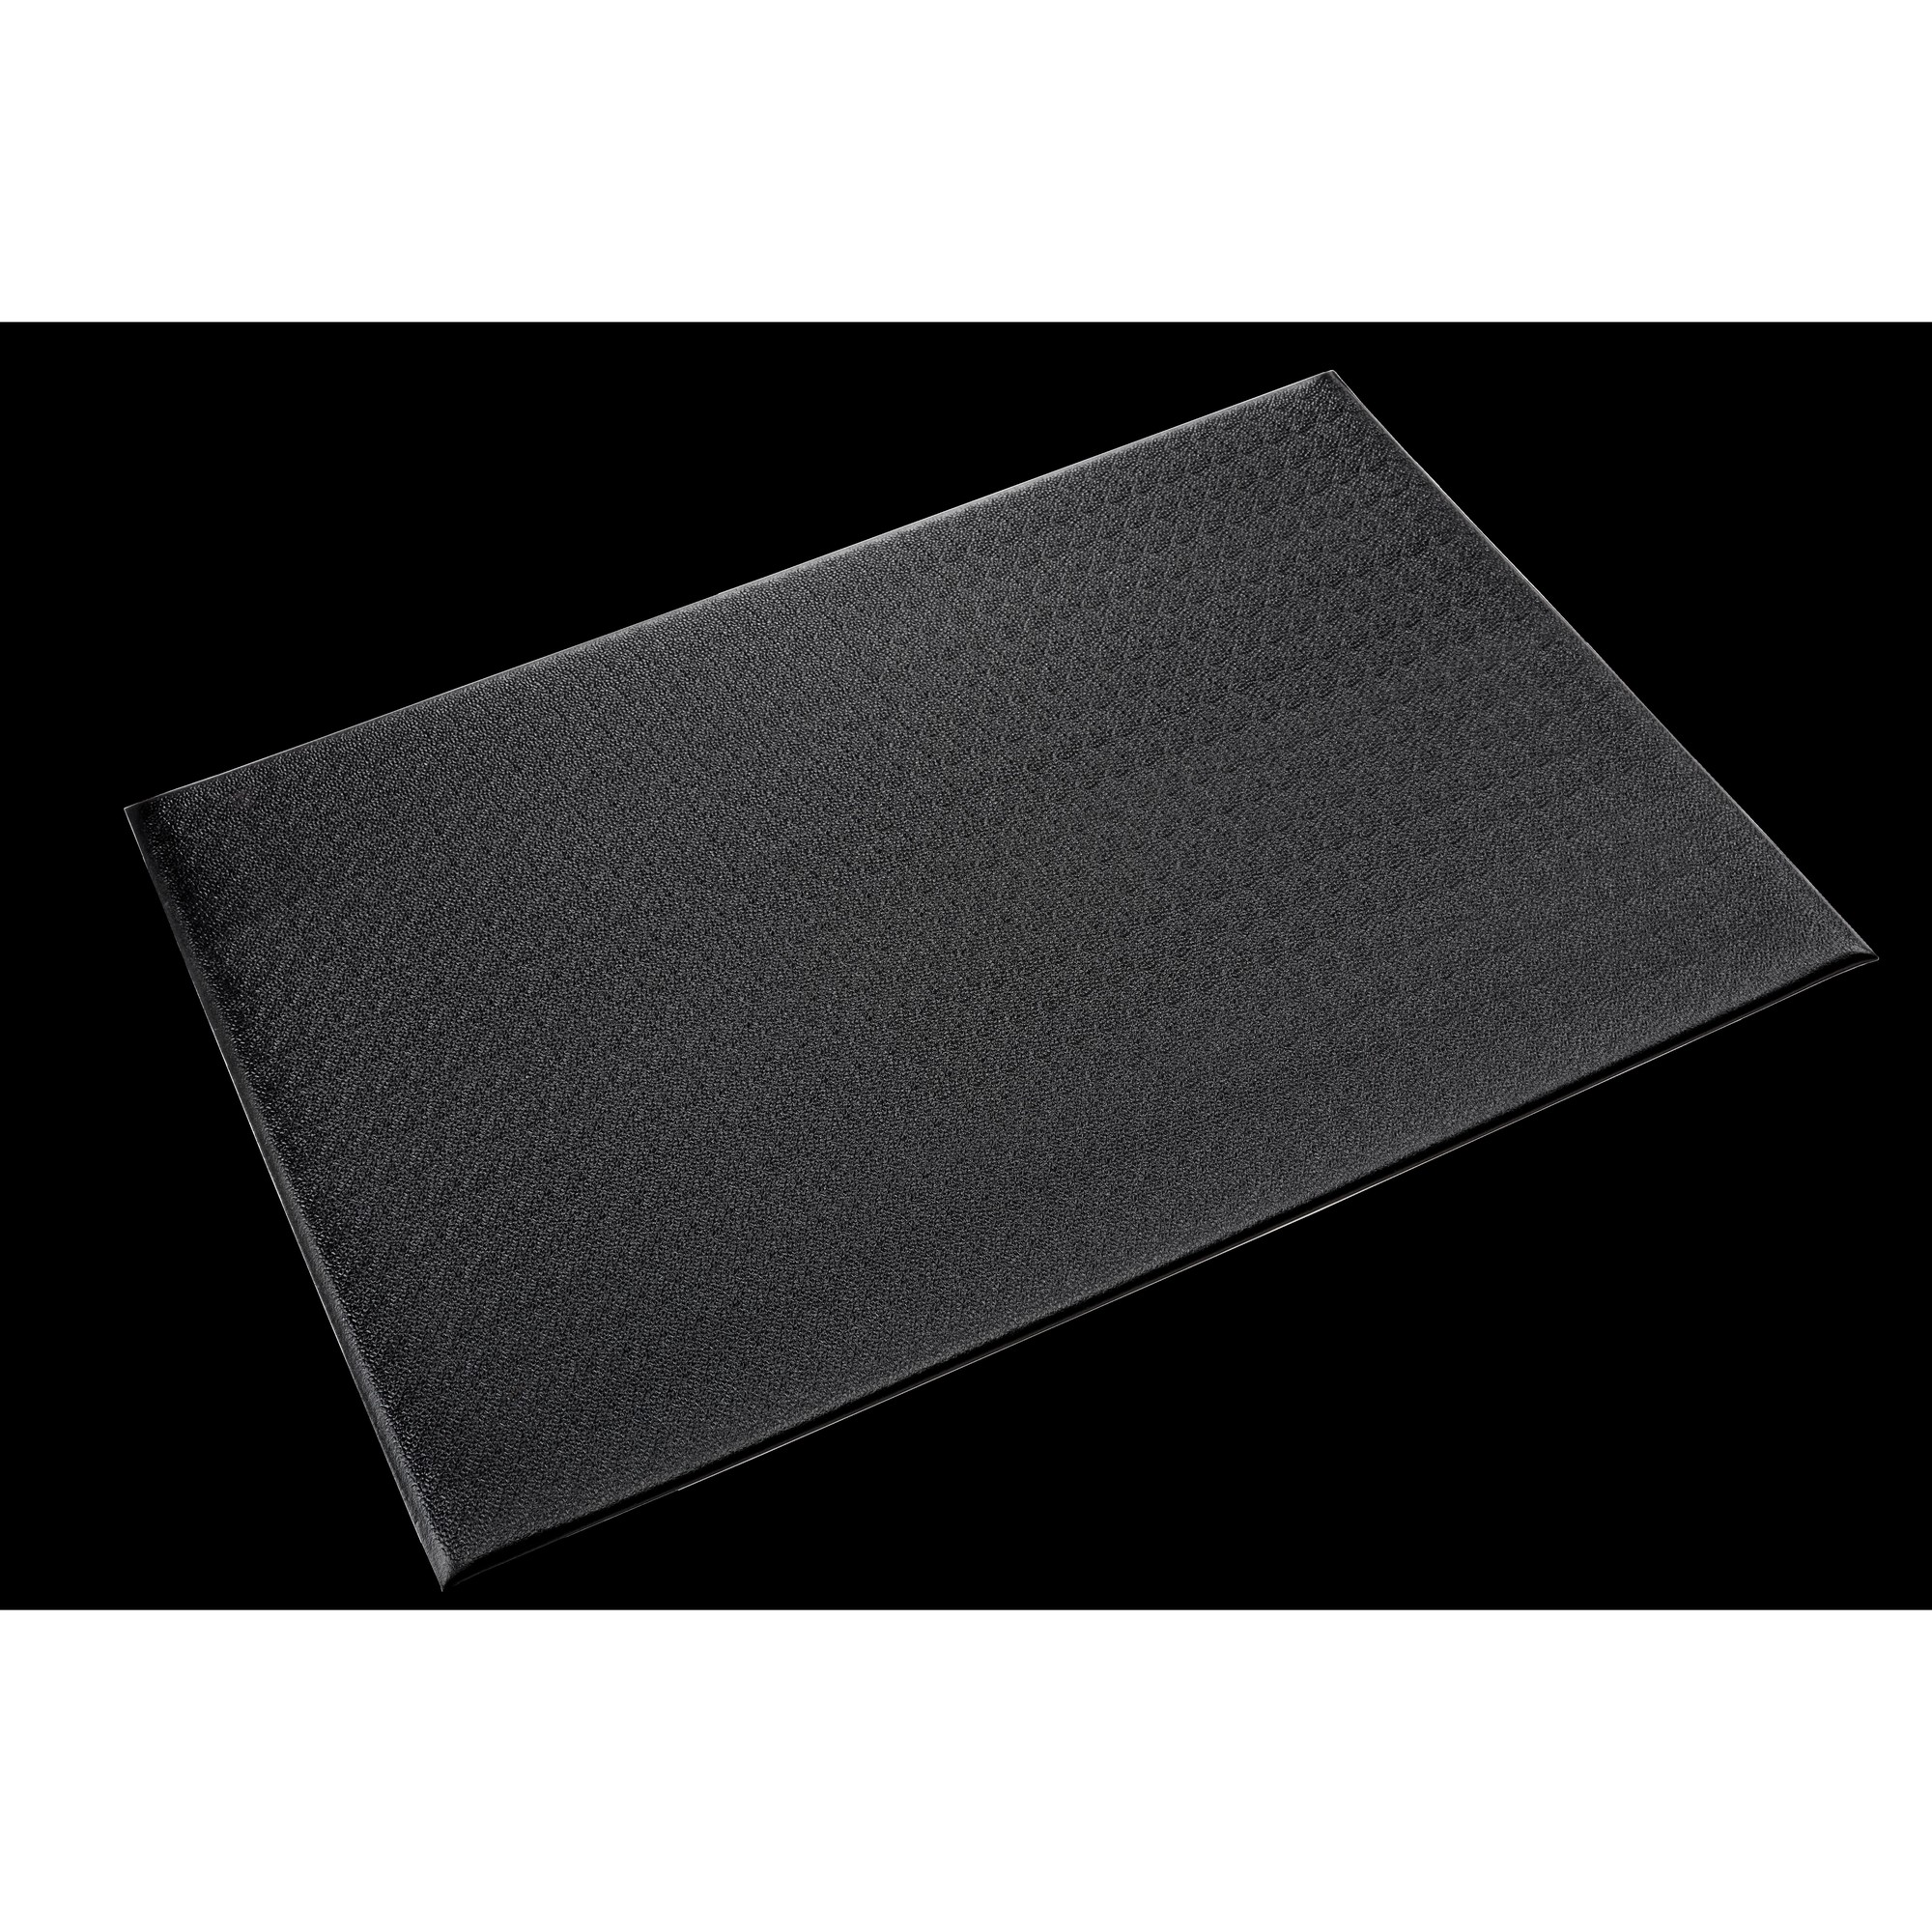 Crown Matting Technologies, Tuff-Spun 3/8 Pebble-Surface 3ft.x5ft. Black, Width 36 in, Length 60 in, Thickness 3/8 in, Model FP 3660BK